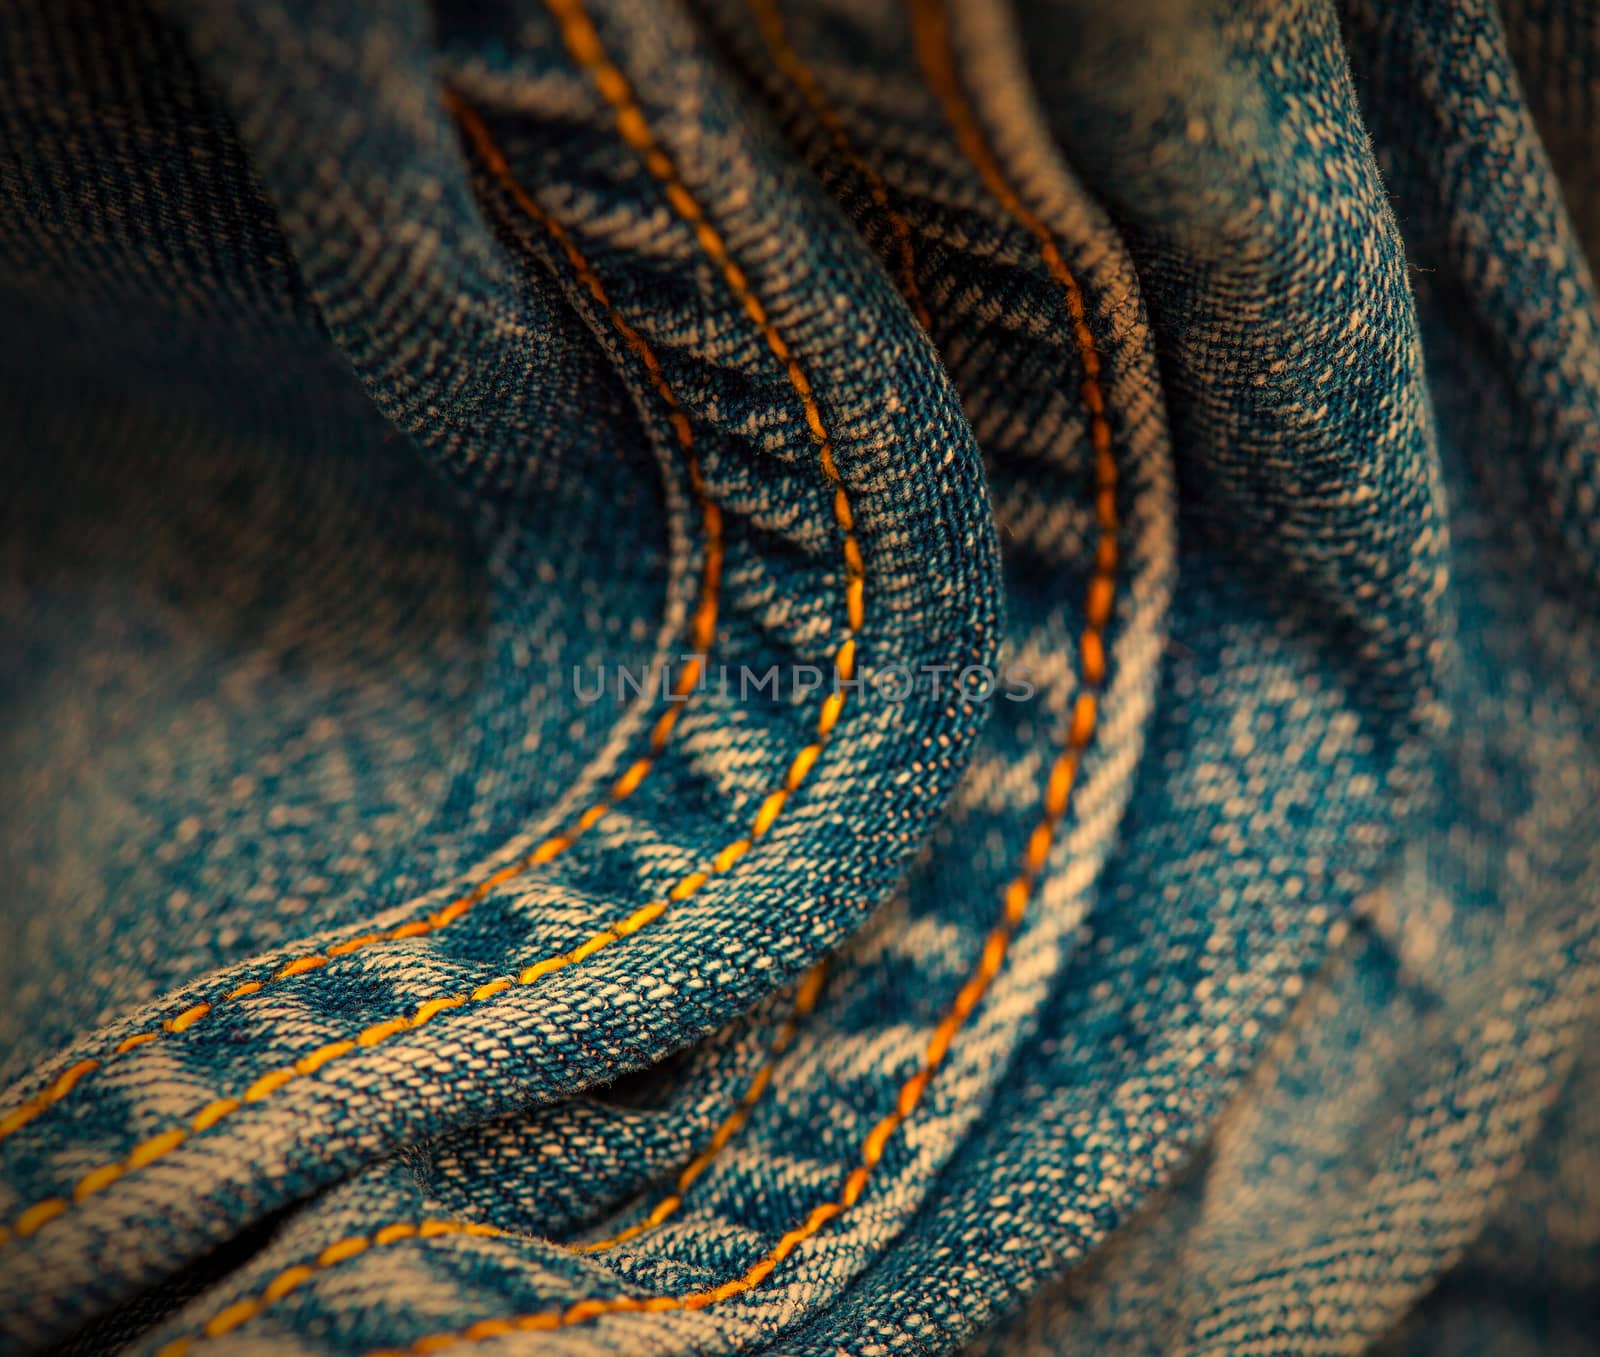 seams on the jeans, close-up. small depth sharpness. instagram image retro style